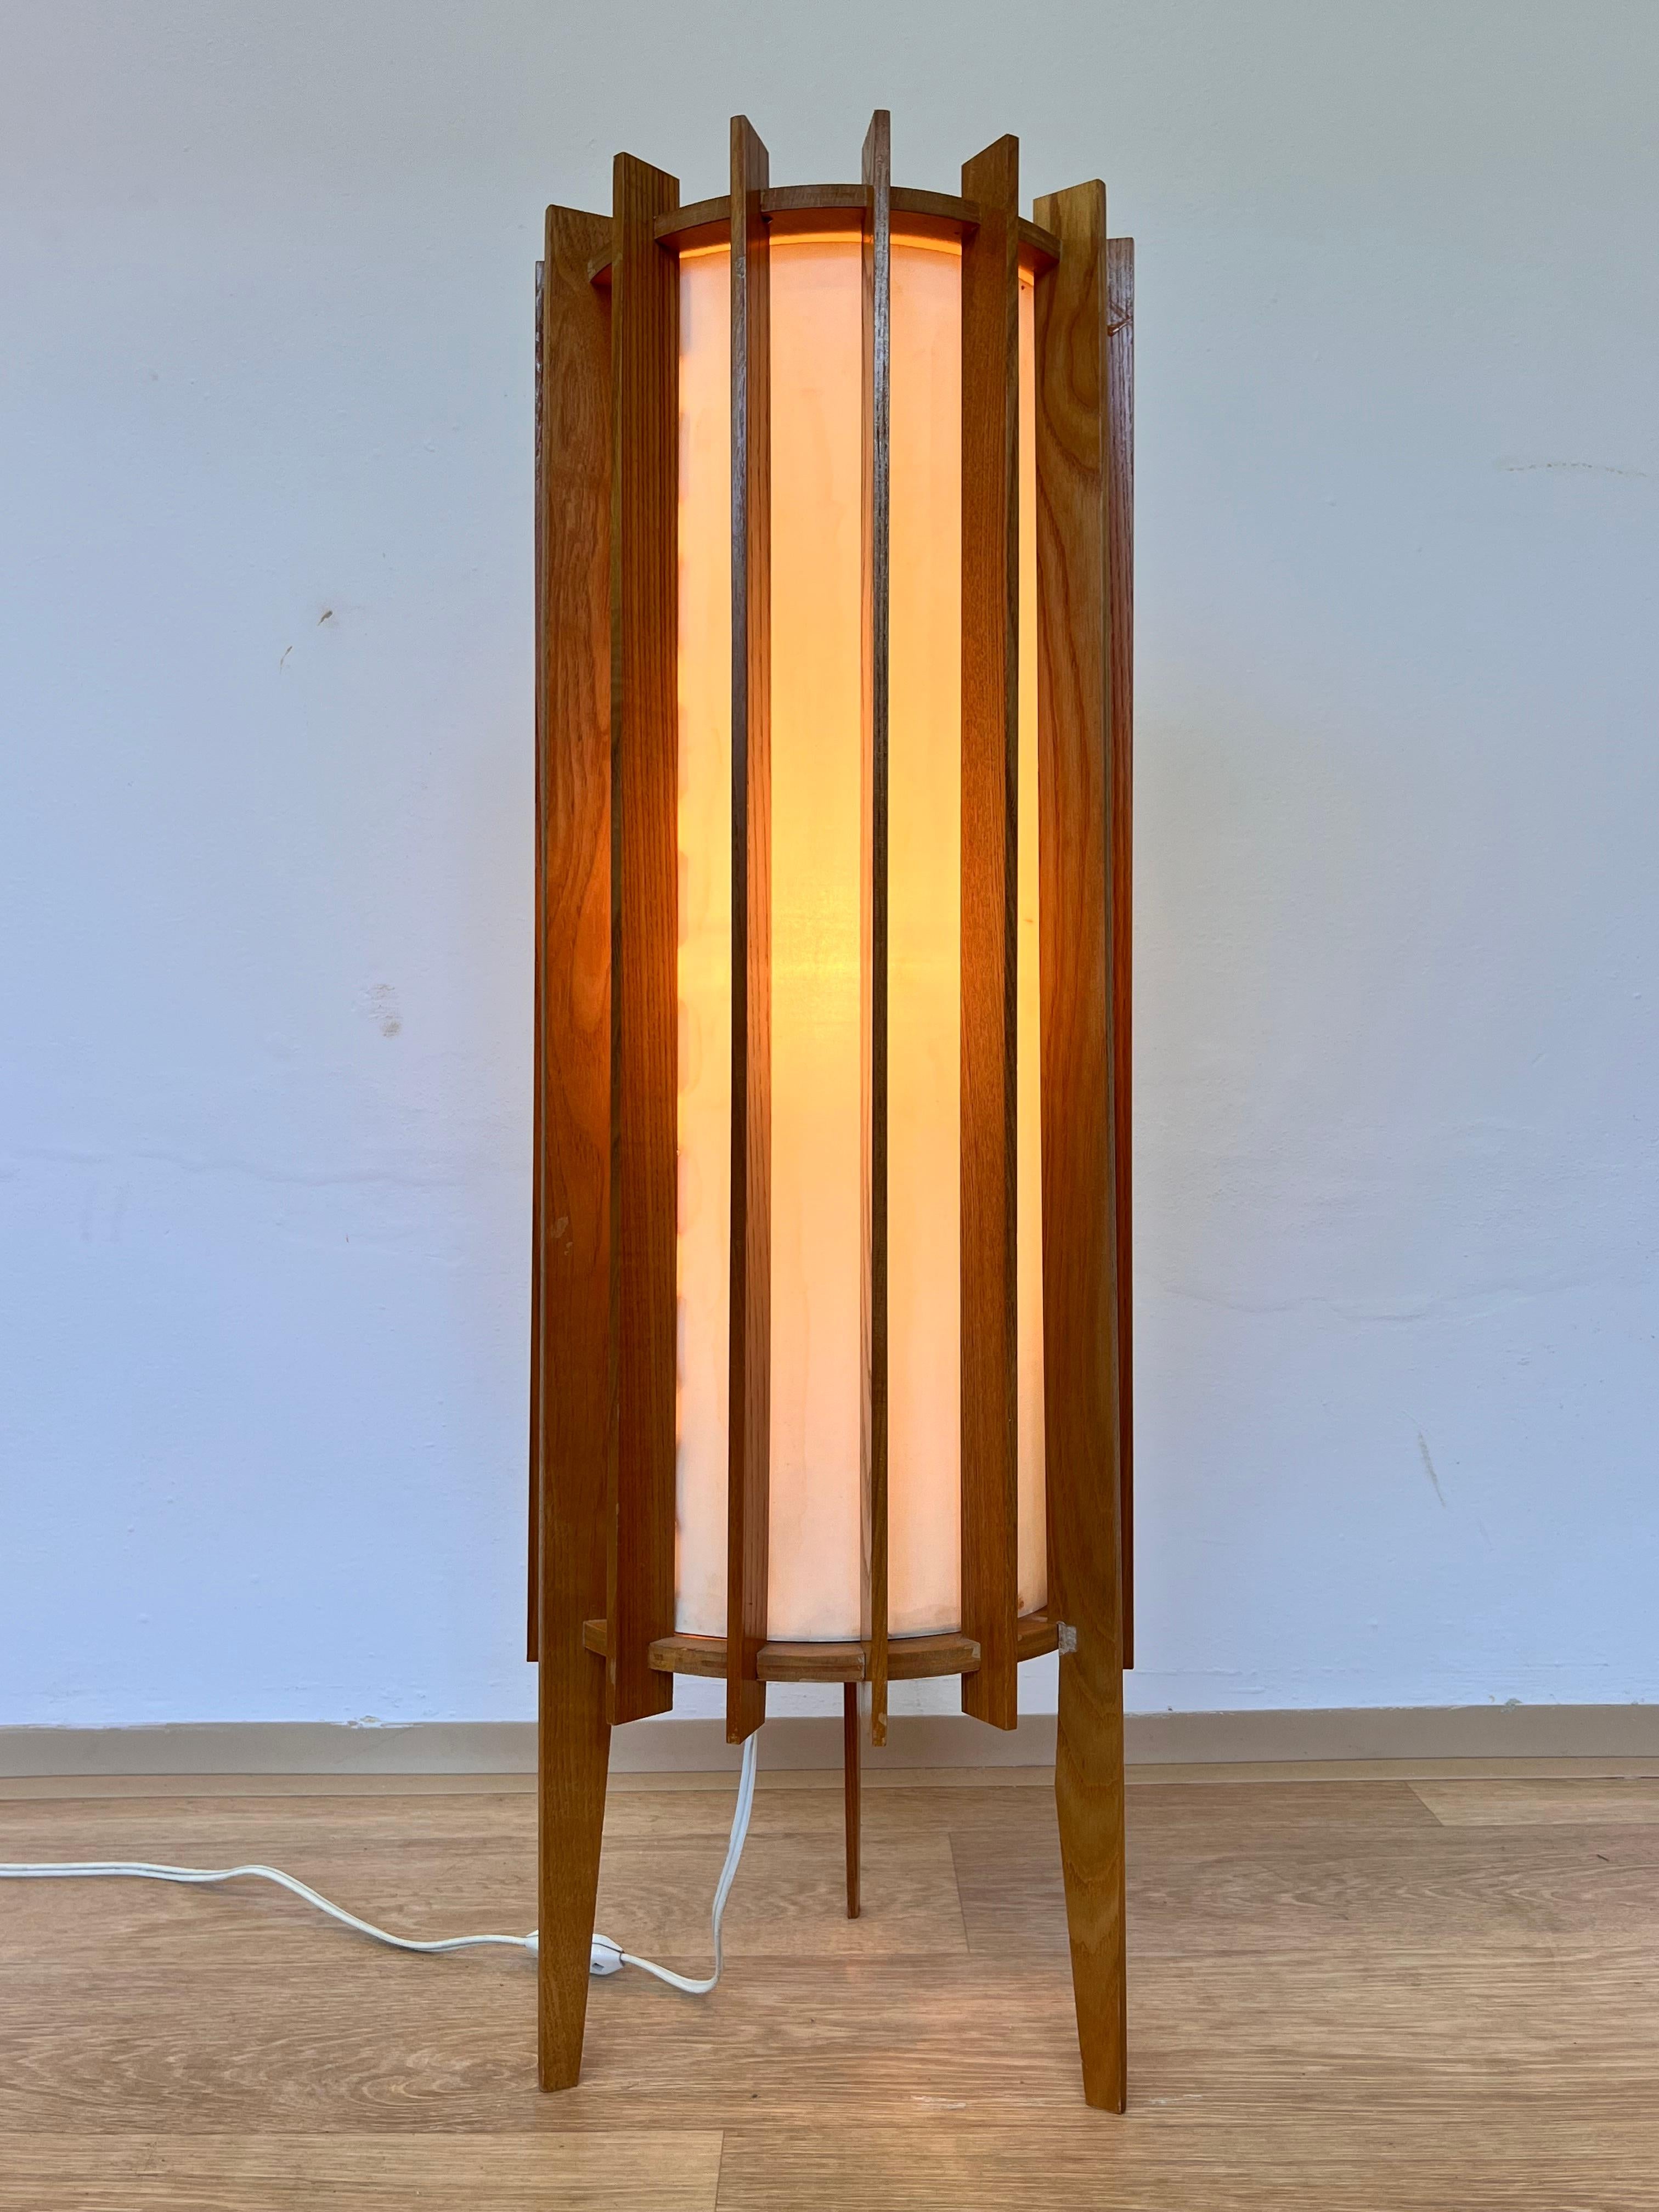 Ib Fabiansen wooden SPACE AGE Floor Lamp by Fog and Mørup - Denmark - 1960s In Good Condition For Sale In Praha, CZ